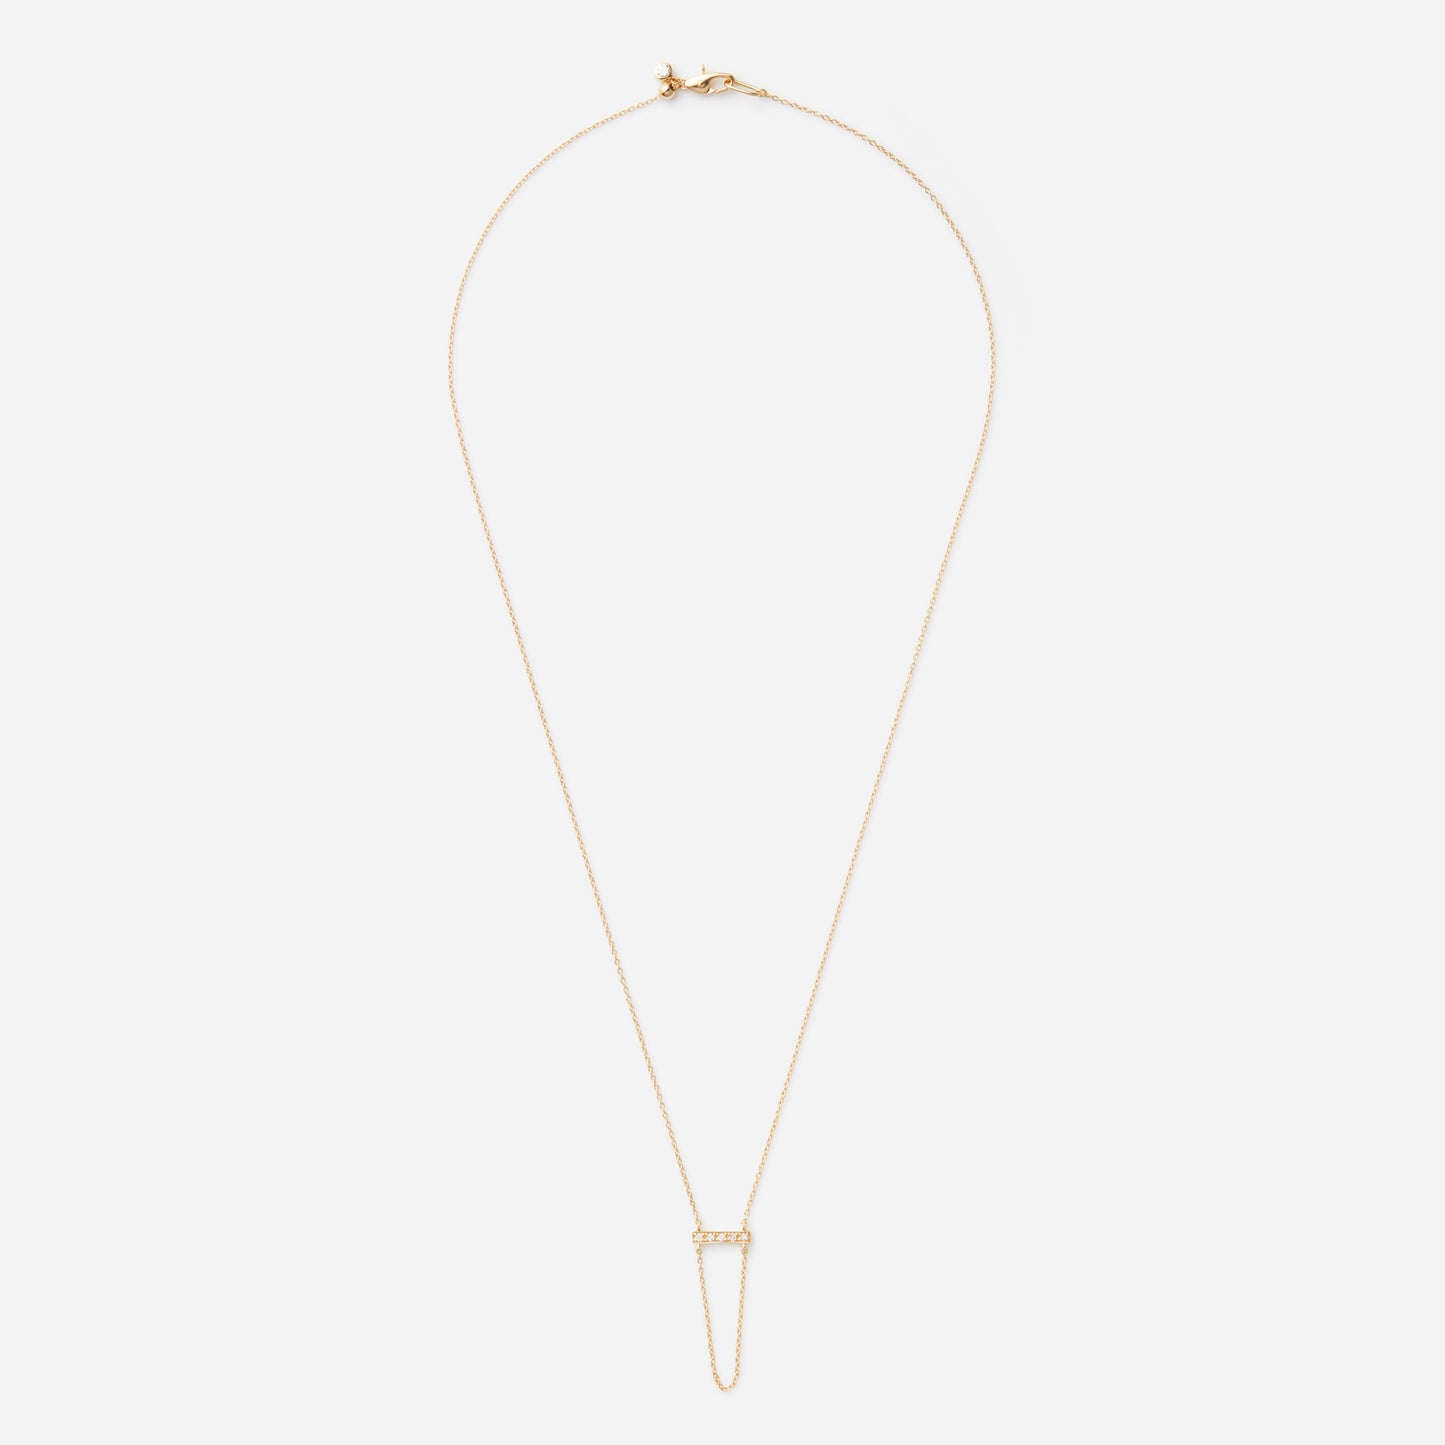 Linear Necklace "Bar chain"